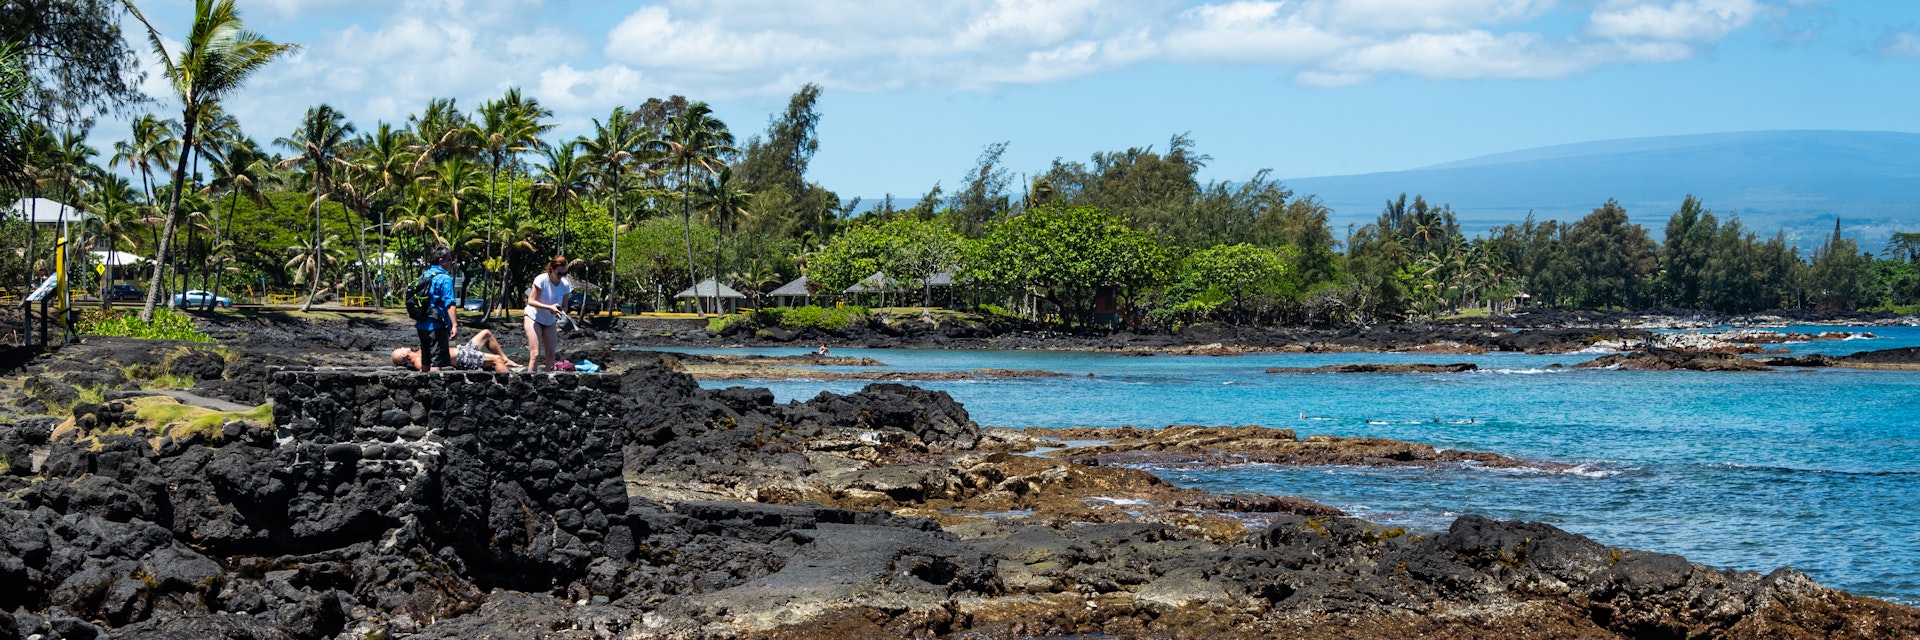 HILO, HAWAII/U.S.A. - MAY 22, 2019: Photo of unidentified people enjoying the Richardson Beach Park, located on the east coast of the Big Island.
1553358317
beach, beautiful, big island, blue, coast, hawaii, hilo, holiday, island, landscape, nature, ocean, outdoor, paradise, recreation, richardson beach park, scenery, scenic, sea, shore, sky, summer, tourism, travel, tropical, u.s., vacation, view, water